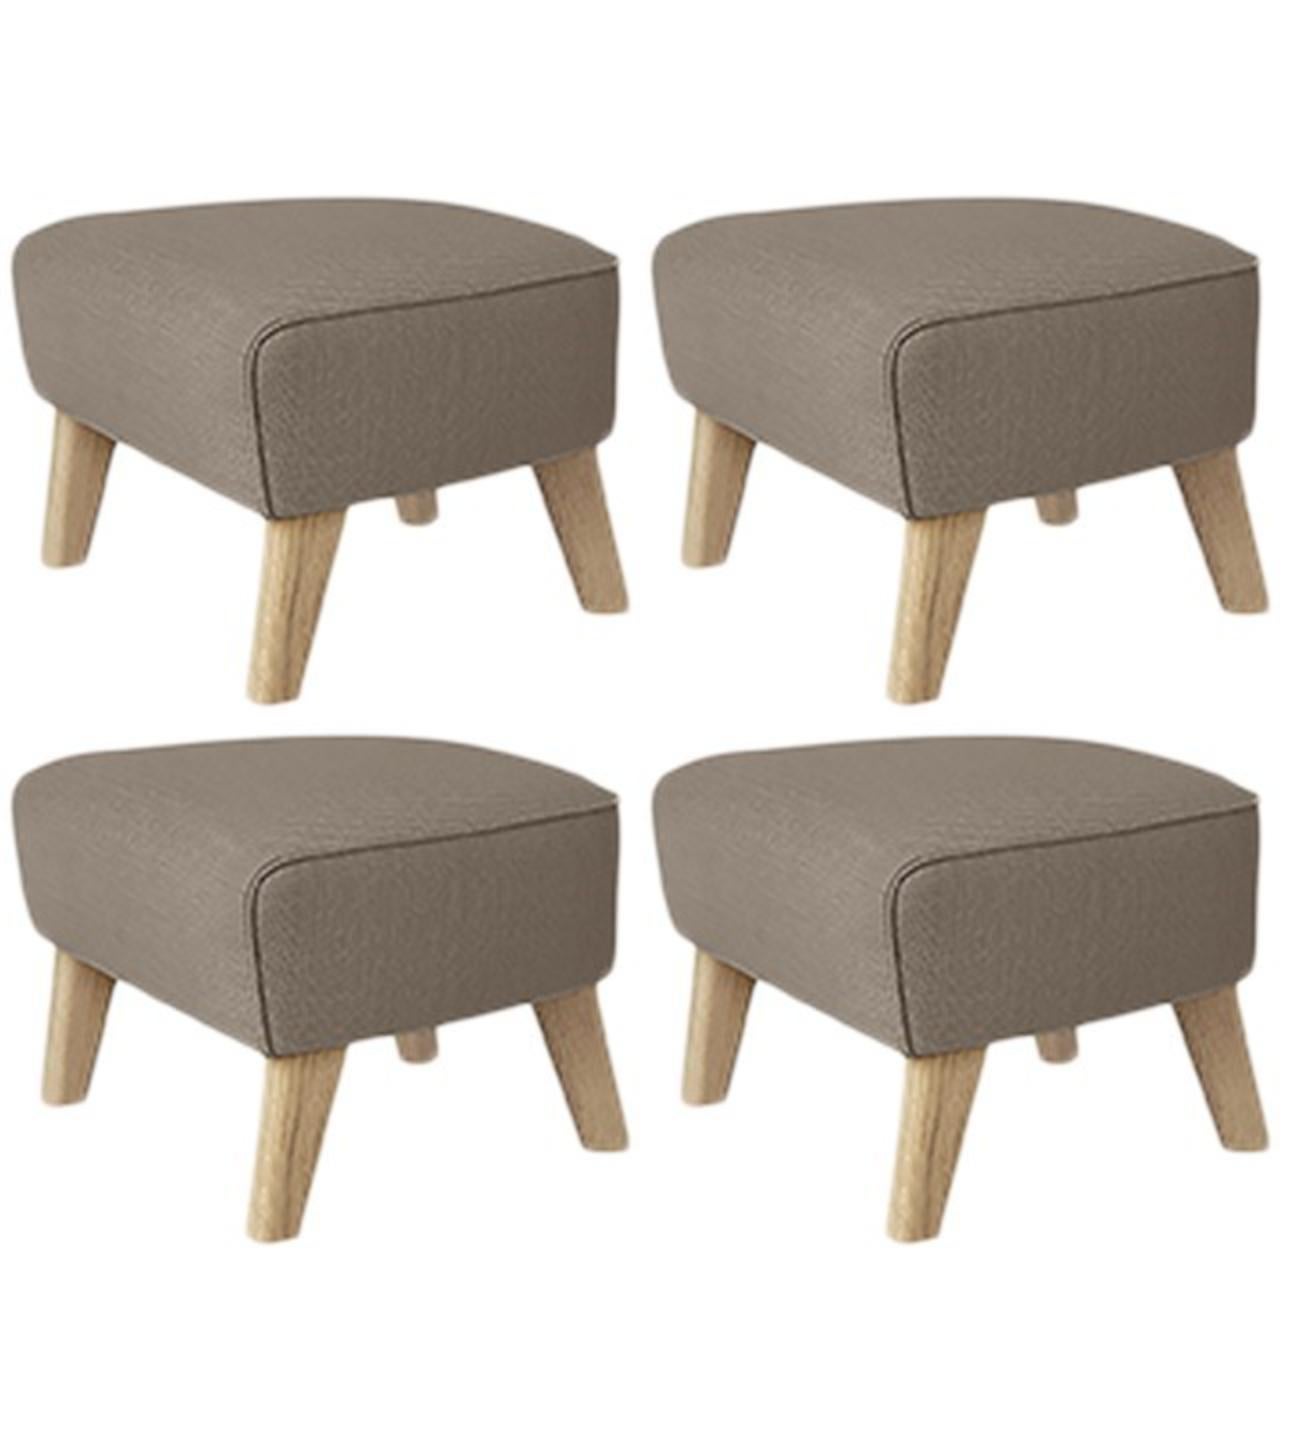 Set of 4 dark beige, natural oak Raf Simons Vidar3 My Own Chair Footstool by Lassen
Dimensions: W 56 x D 58 x H 40 cm 
Materials: Textile, oak
Also available: other colors available.

The My Own Chair Footstool has been designed in the same